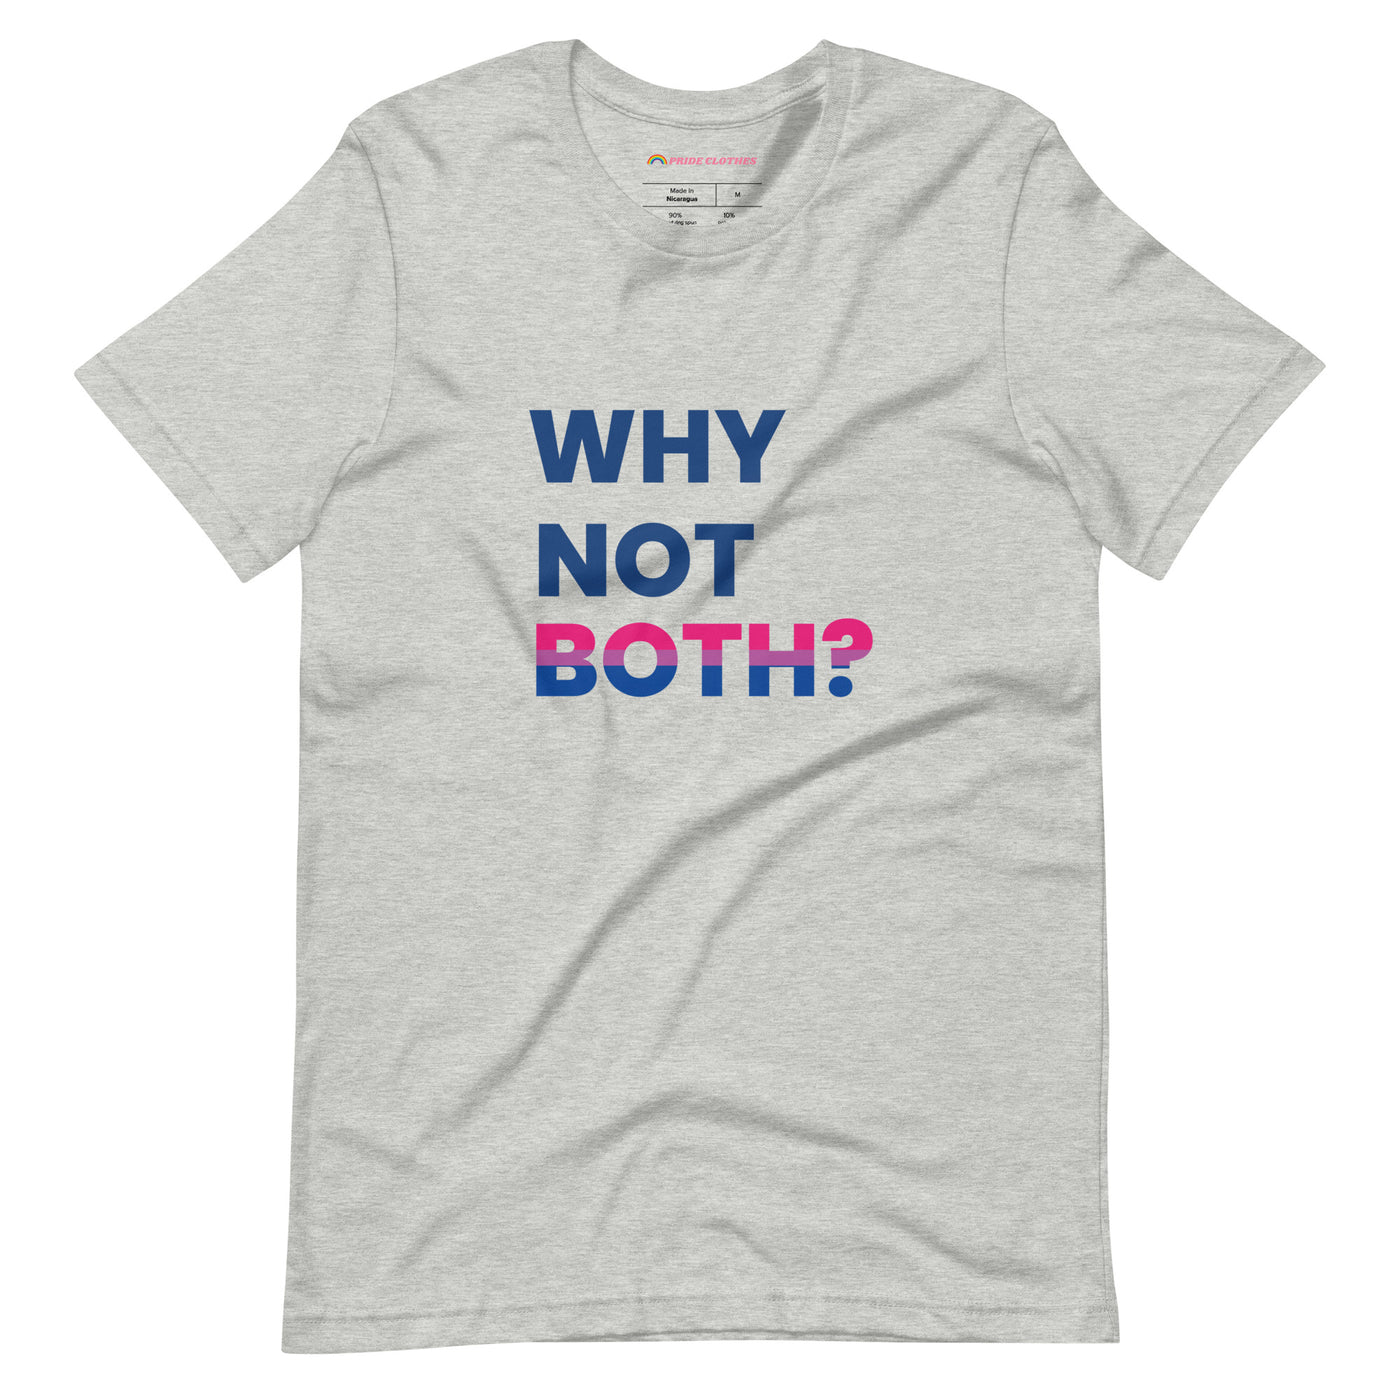 Pride Clothes - Why Limit Yourself to One Why Not Both BI Pride T-Shirt - Athletic Heather